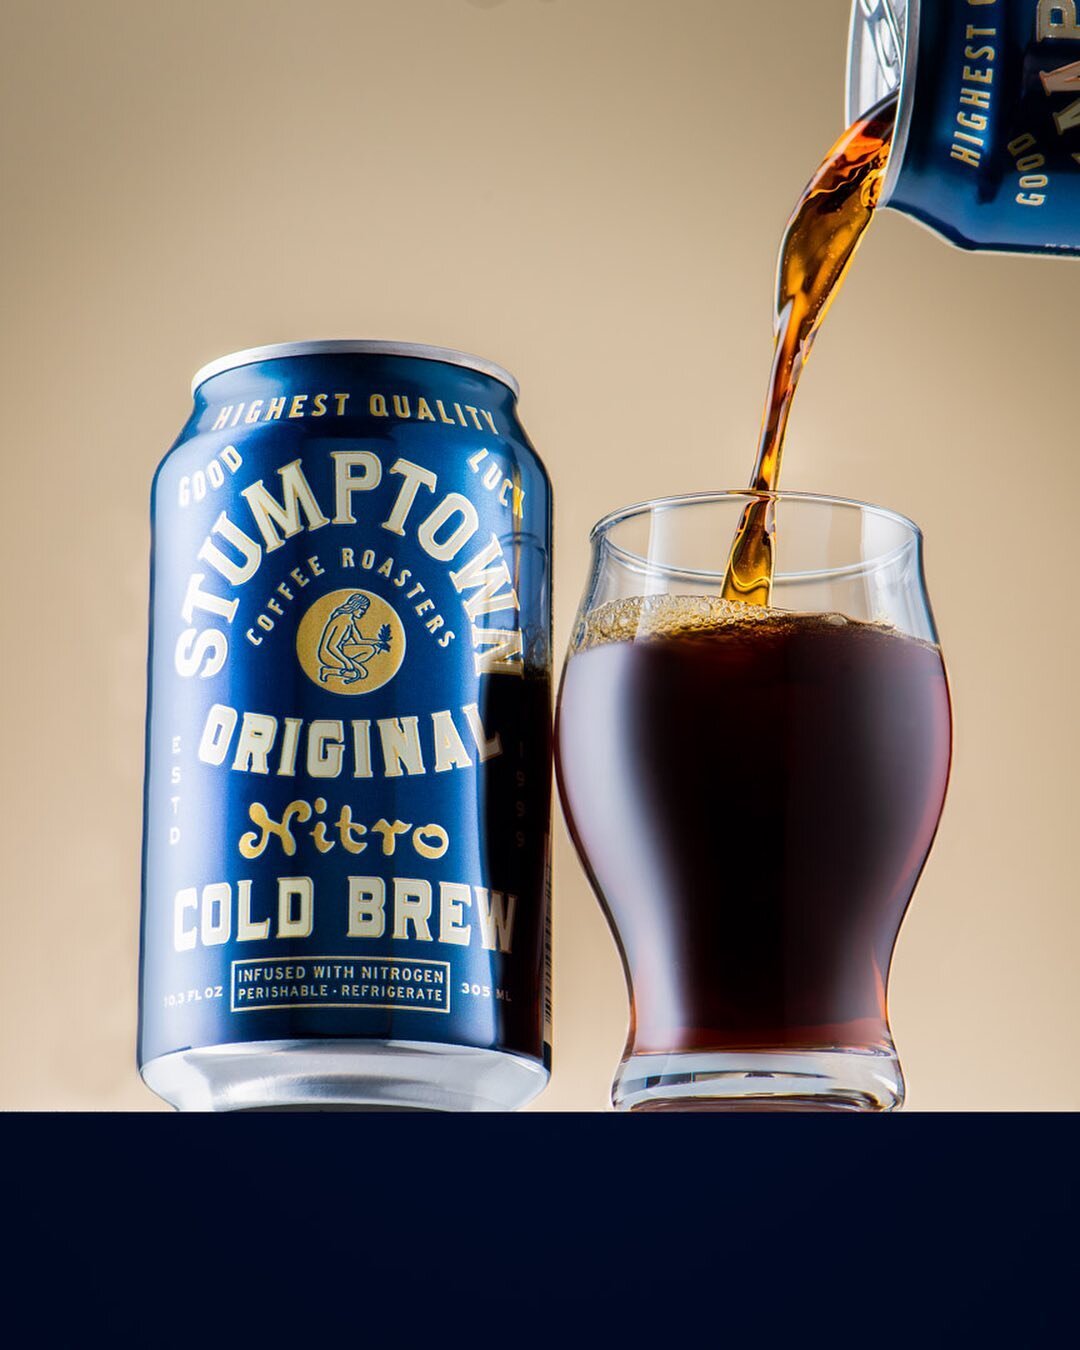 Three lights and lots of modifiers&hellip; great light test in the studio recently! No @stumptowncoffee was wasted in the making of this image 😉 Shot for personal work.

#butfirstcoffee #brandphotography #foodphotographer #drinkphotography #gradient